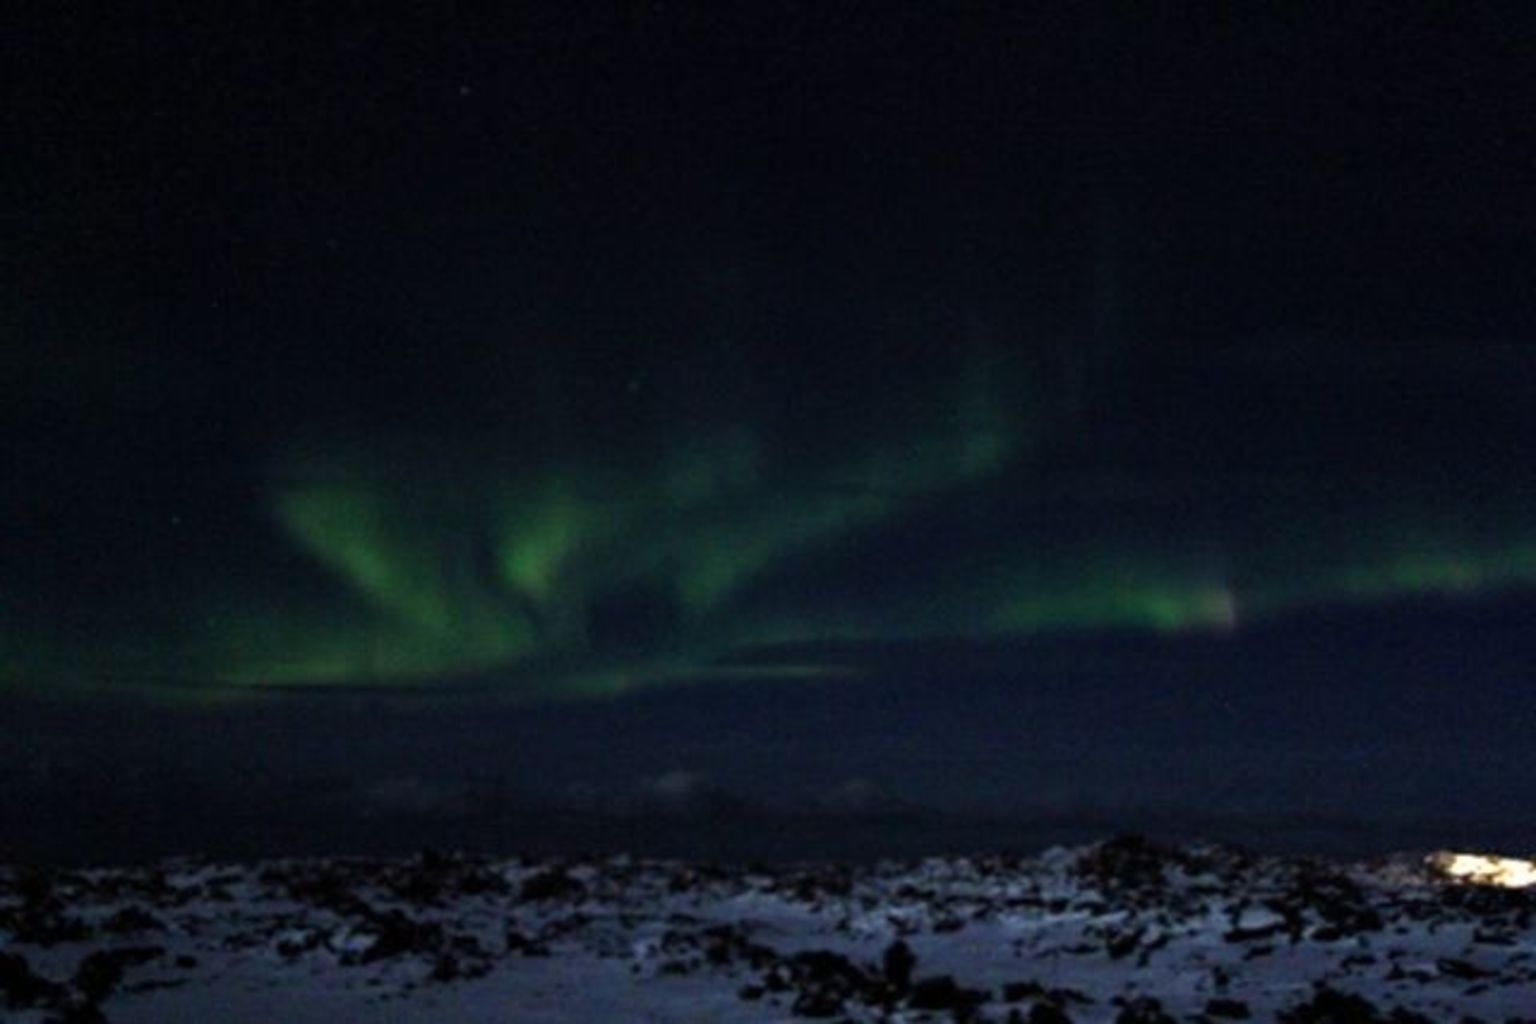 Northern lights by jeep in iceland photo 11454174 1536tall